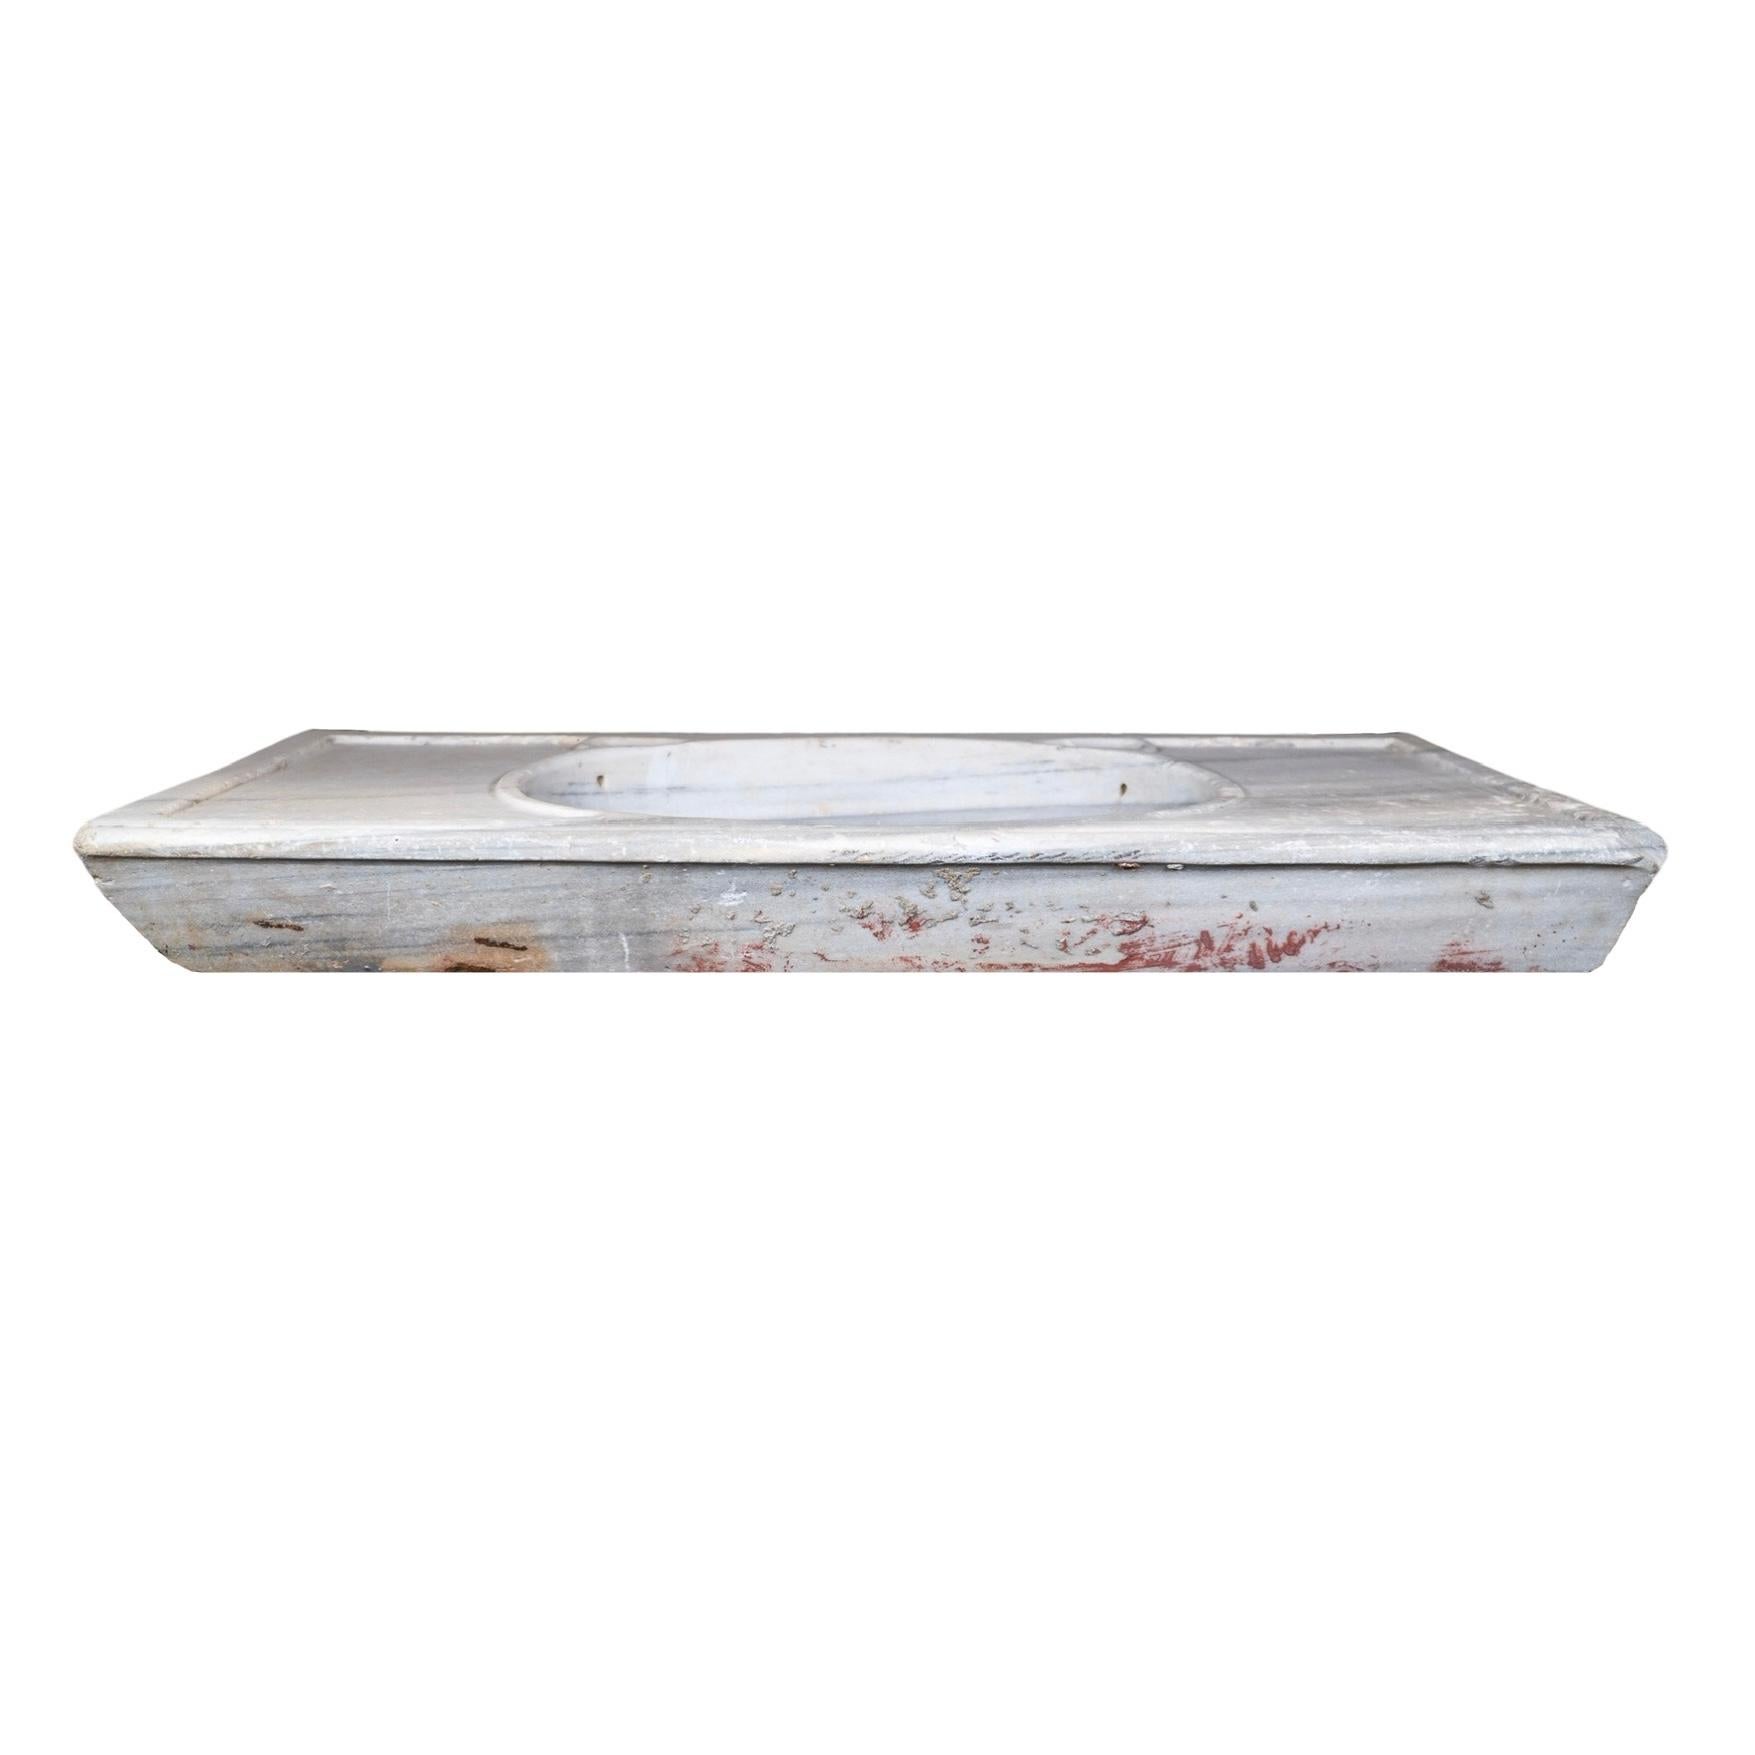 Crafted from luxurious white veined Carrara marble imported from Greece and designed in a low-line rectangular wide shape, this Greece Marble Sink adds a touch of elegance to any bathroom. Its has a pre-drilled hole for easy drainage. Its timeless